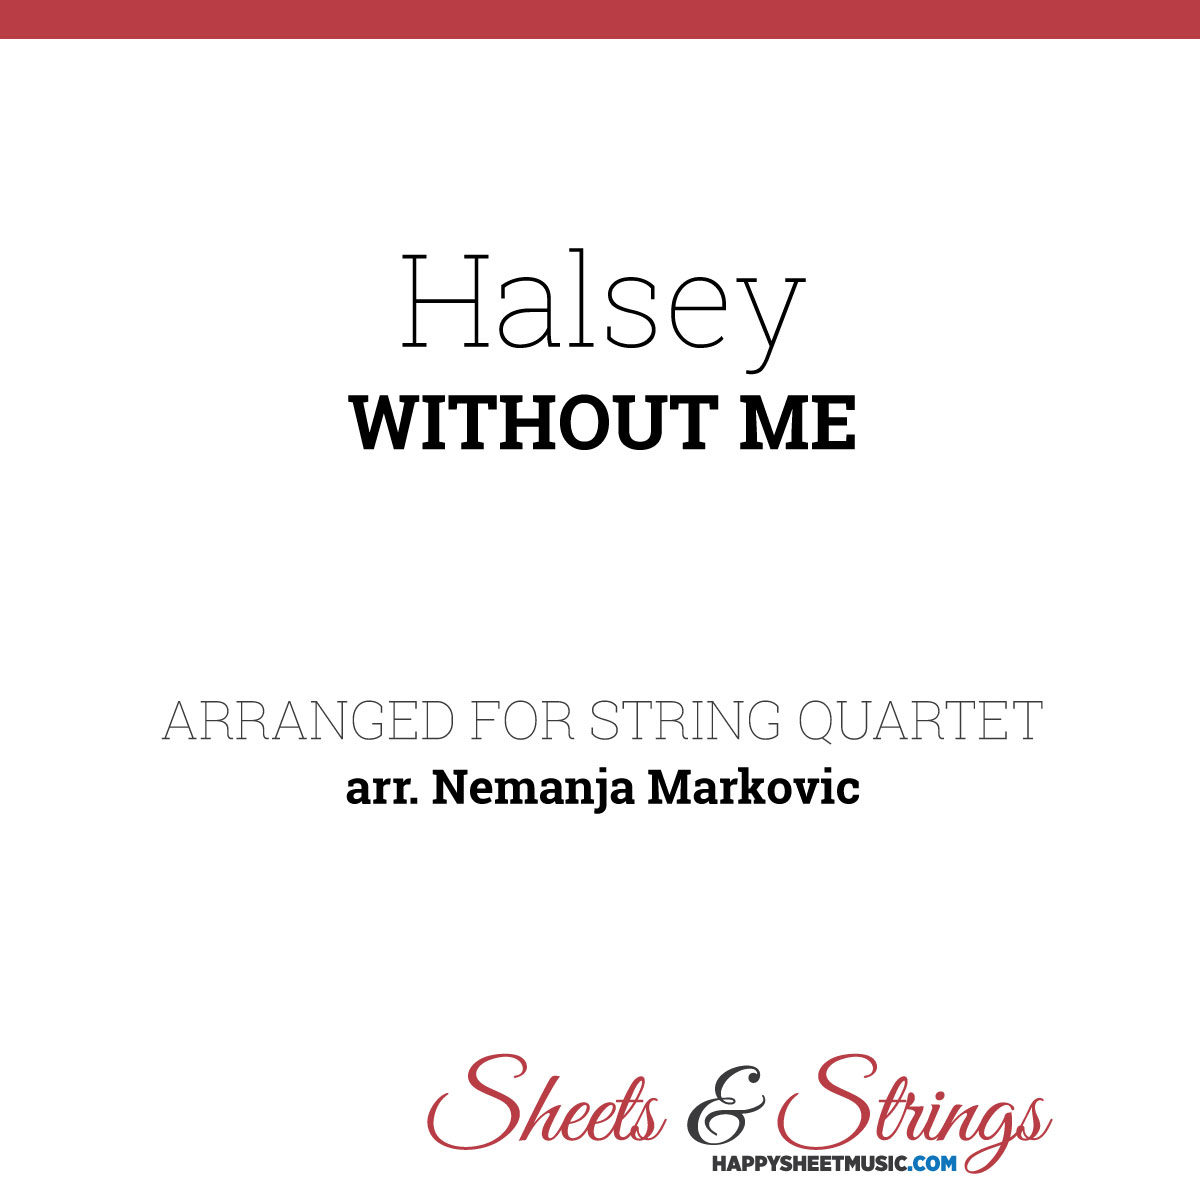 Halsey - Without Me - Sheet Music for String Quartet - Music Arrangement for String Quartet